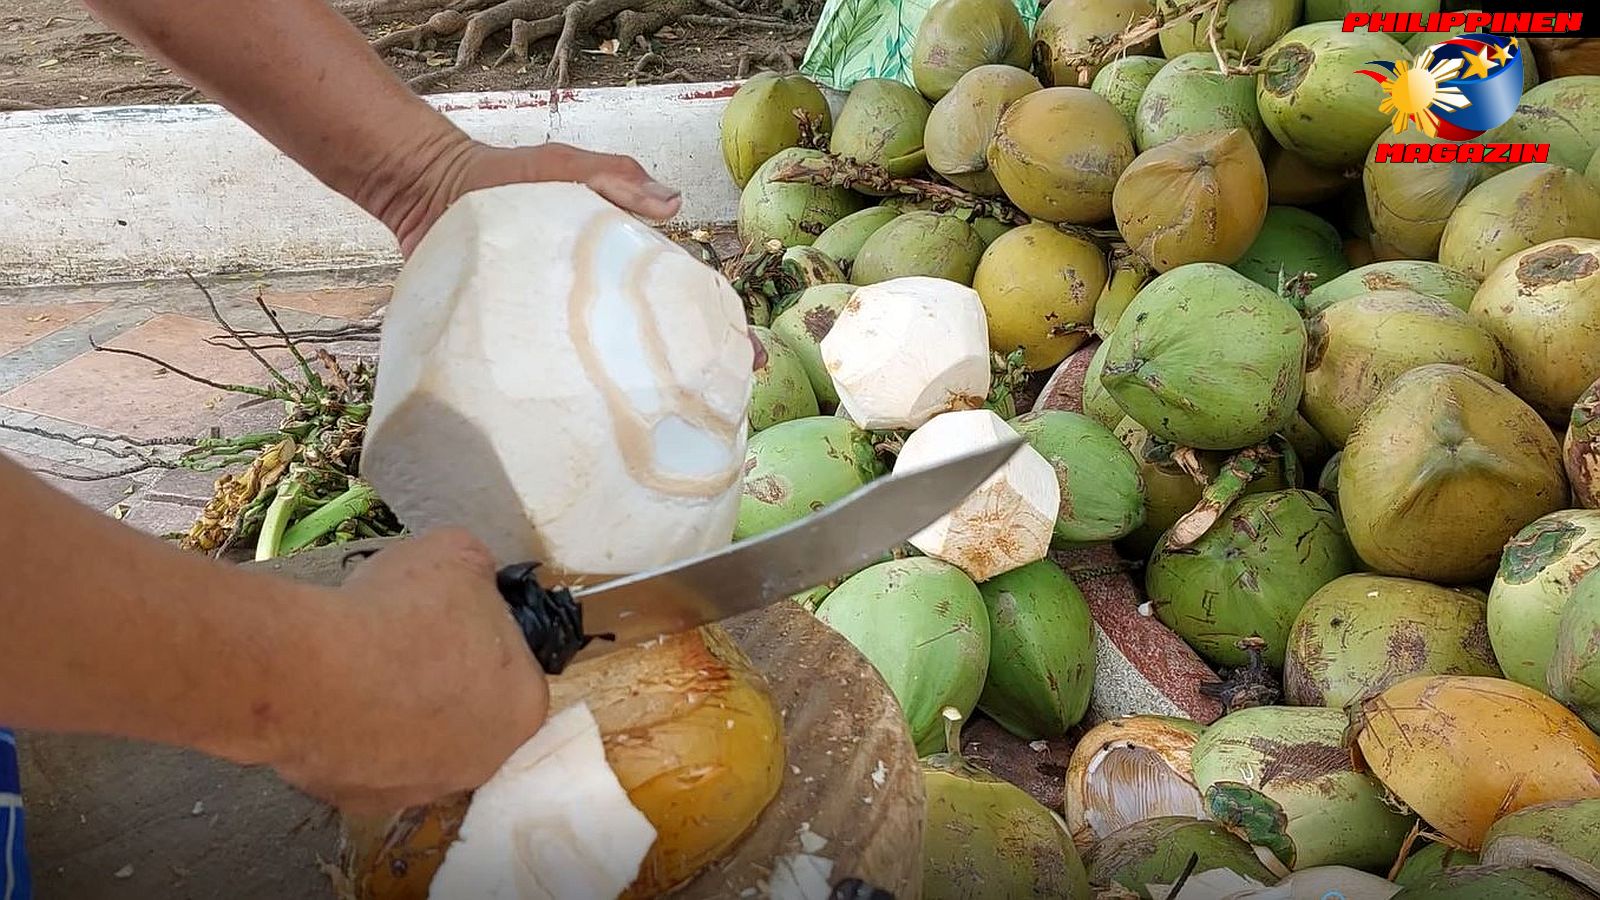 SIGHTS OF CAGAYAN DE ORO CITY & NORTHERN MINDANAO - Thirst Quencher - Coconut  Photo by Sir Dieter Sokoll, KOR